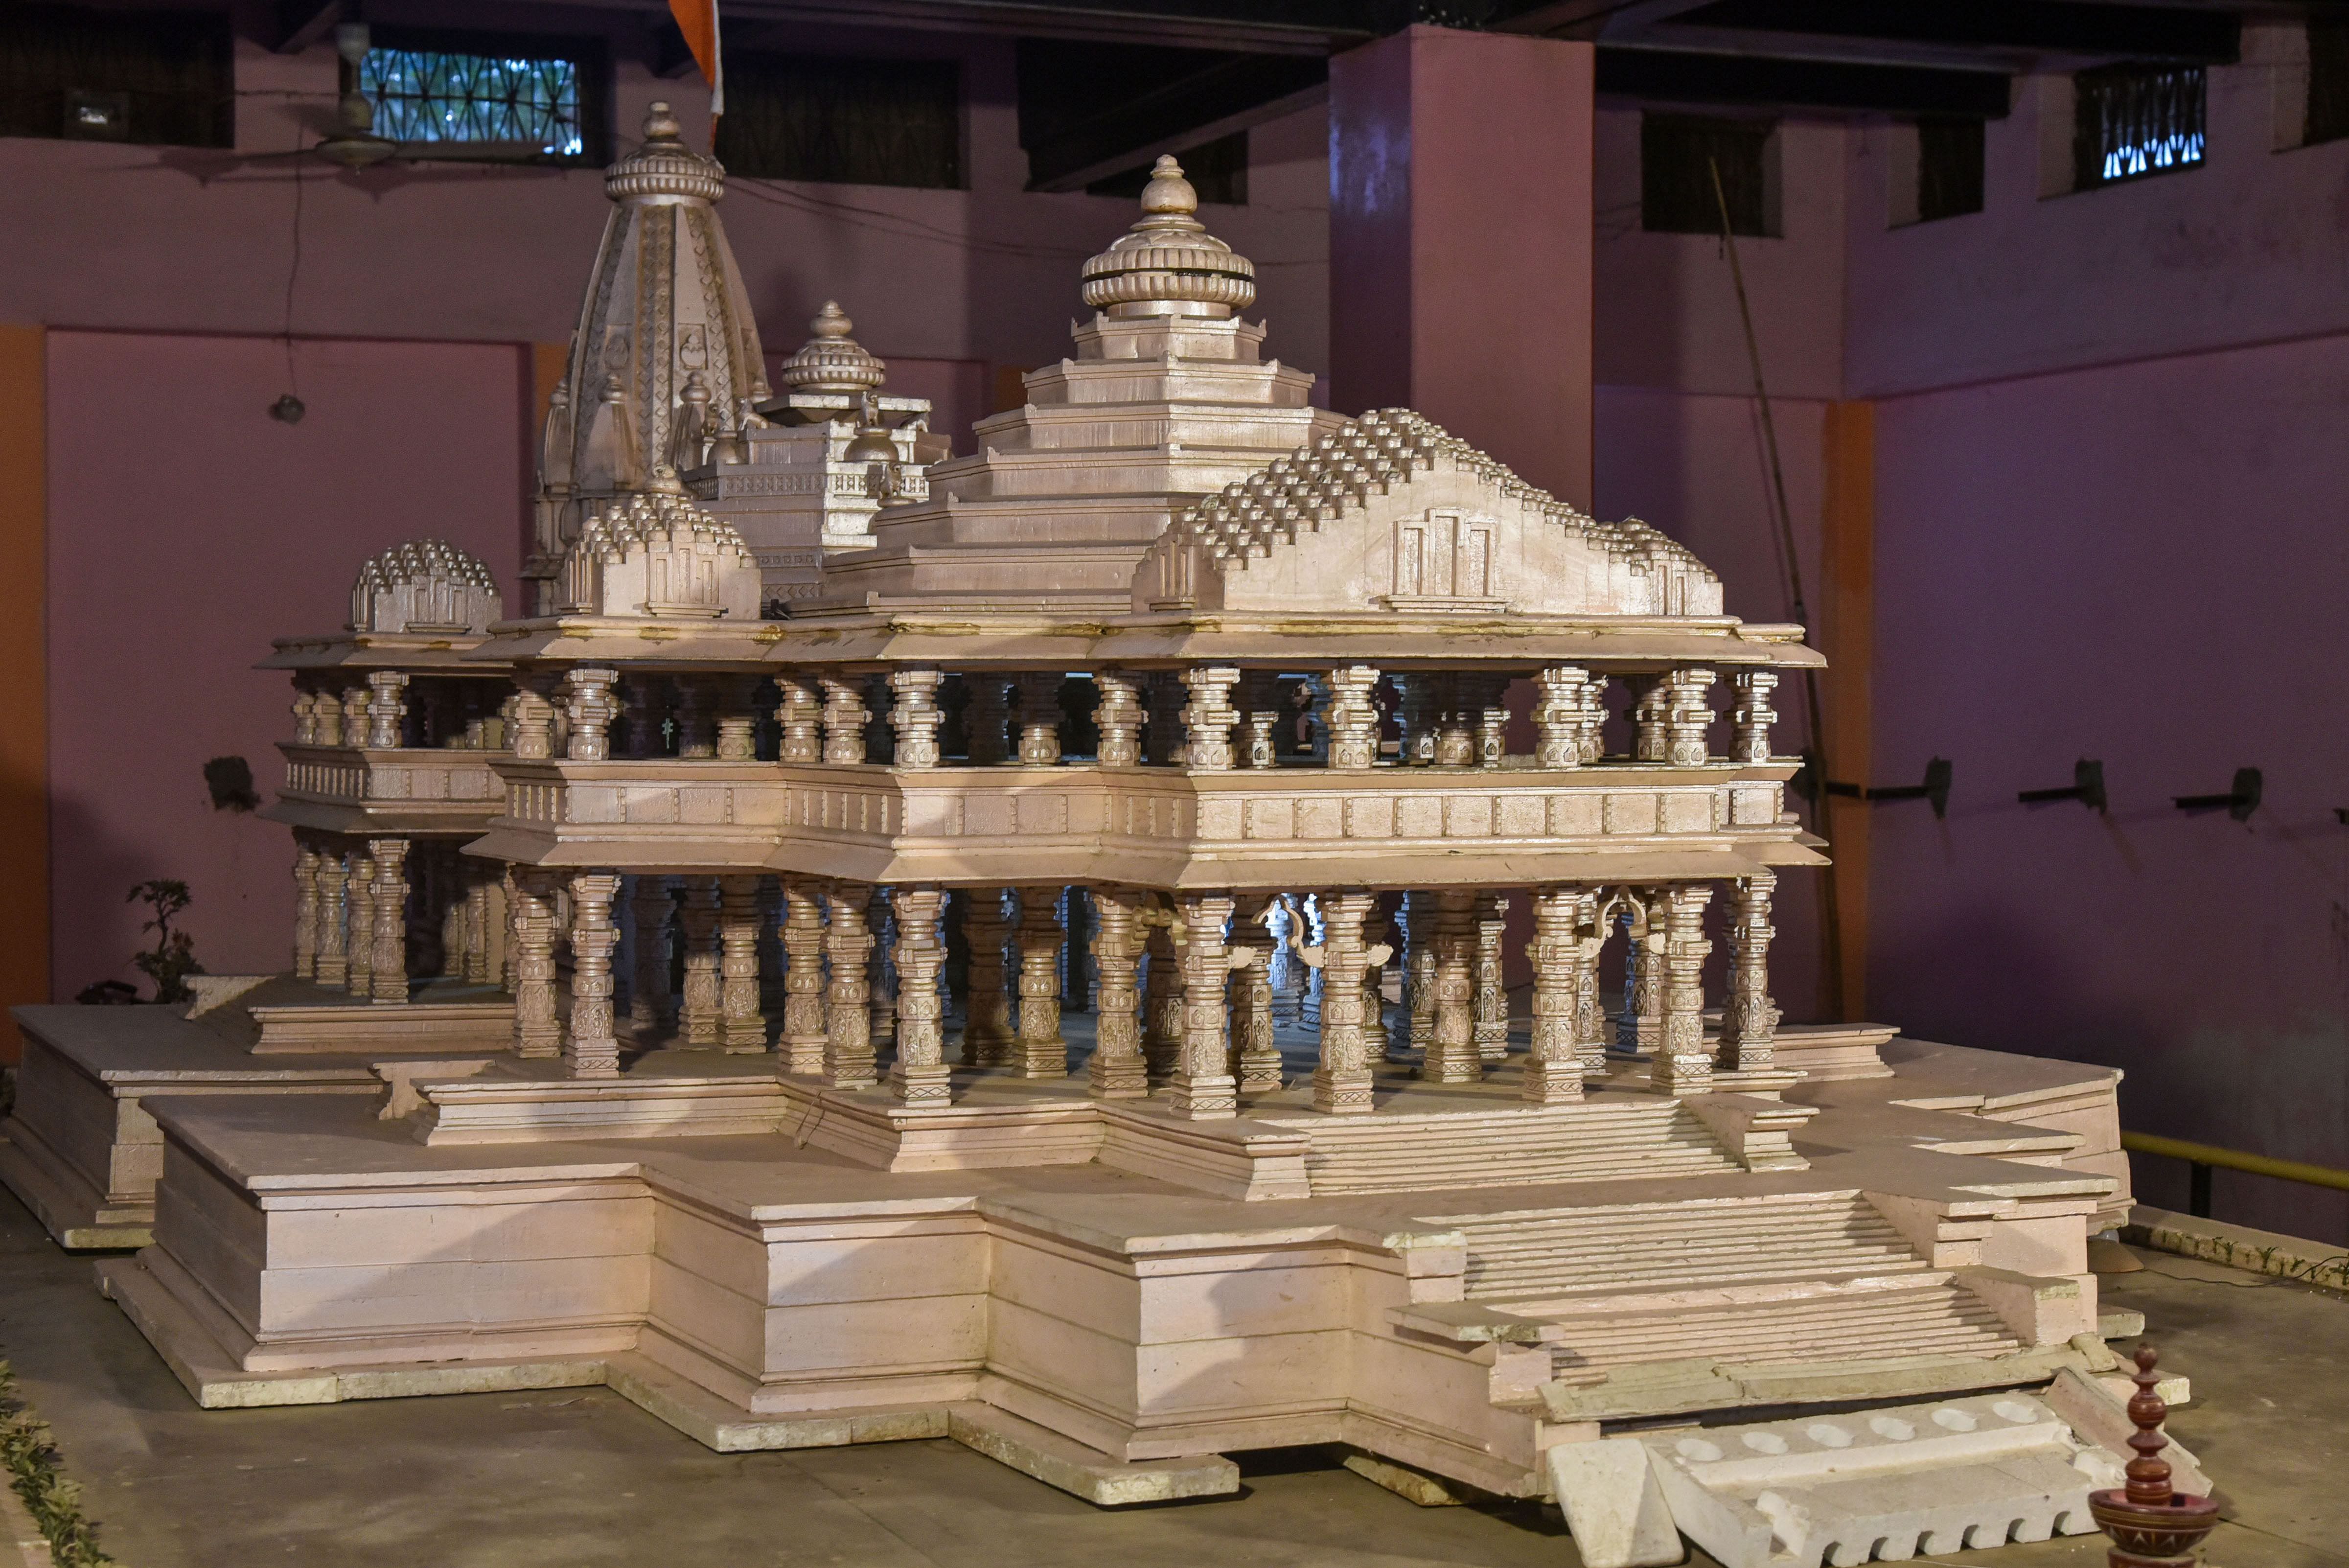 A model of Ram temple displayed at Kar Sewak Puram in Ayodhya, Monday, Aug. 3, 2020. Prime Minister Narendra Modi is scheduled to attend the 'Bhoomi Pujan' ceremony of Ram Temple in Ayodhya on August 5. Credit: PTI Photo